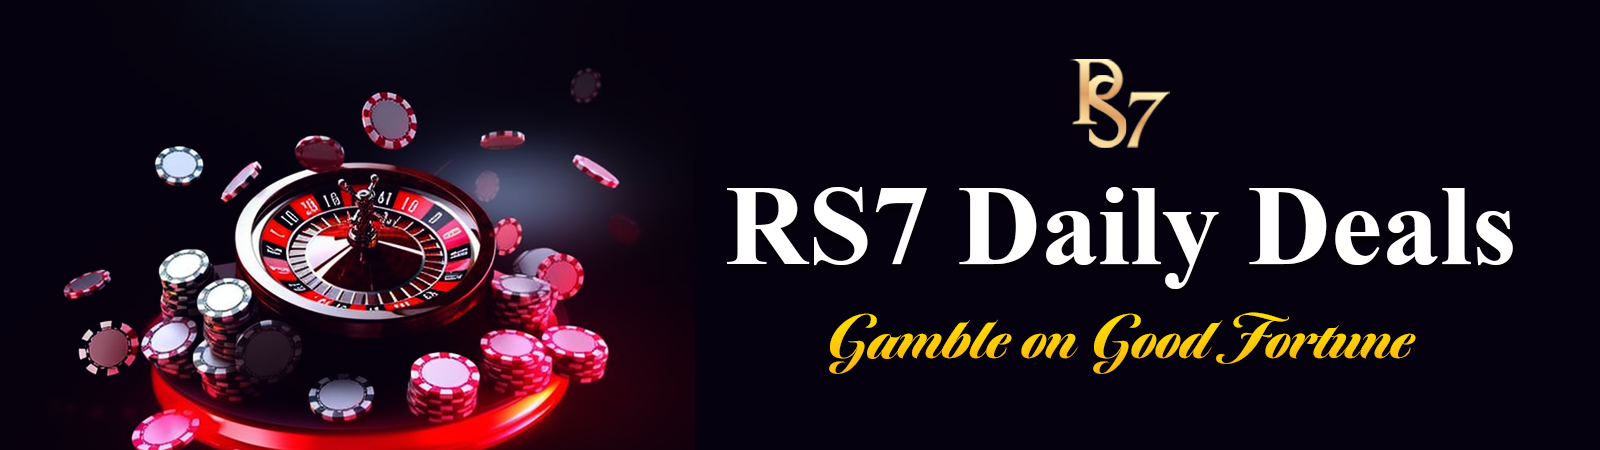 RS7 Daily Deals | Gamble on Good Fortune